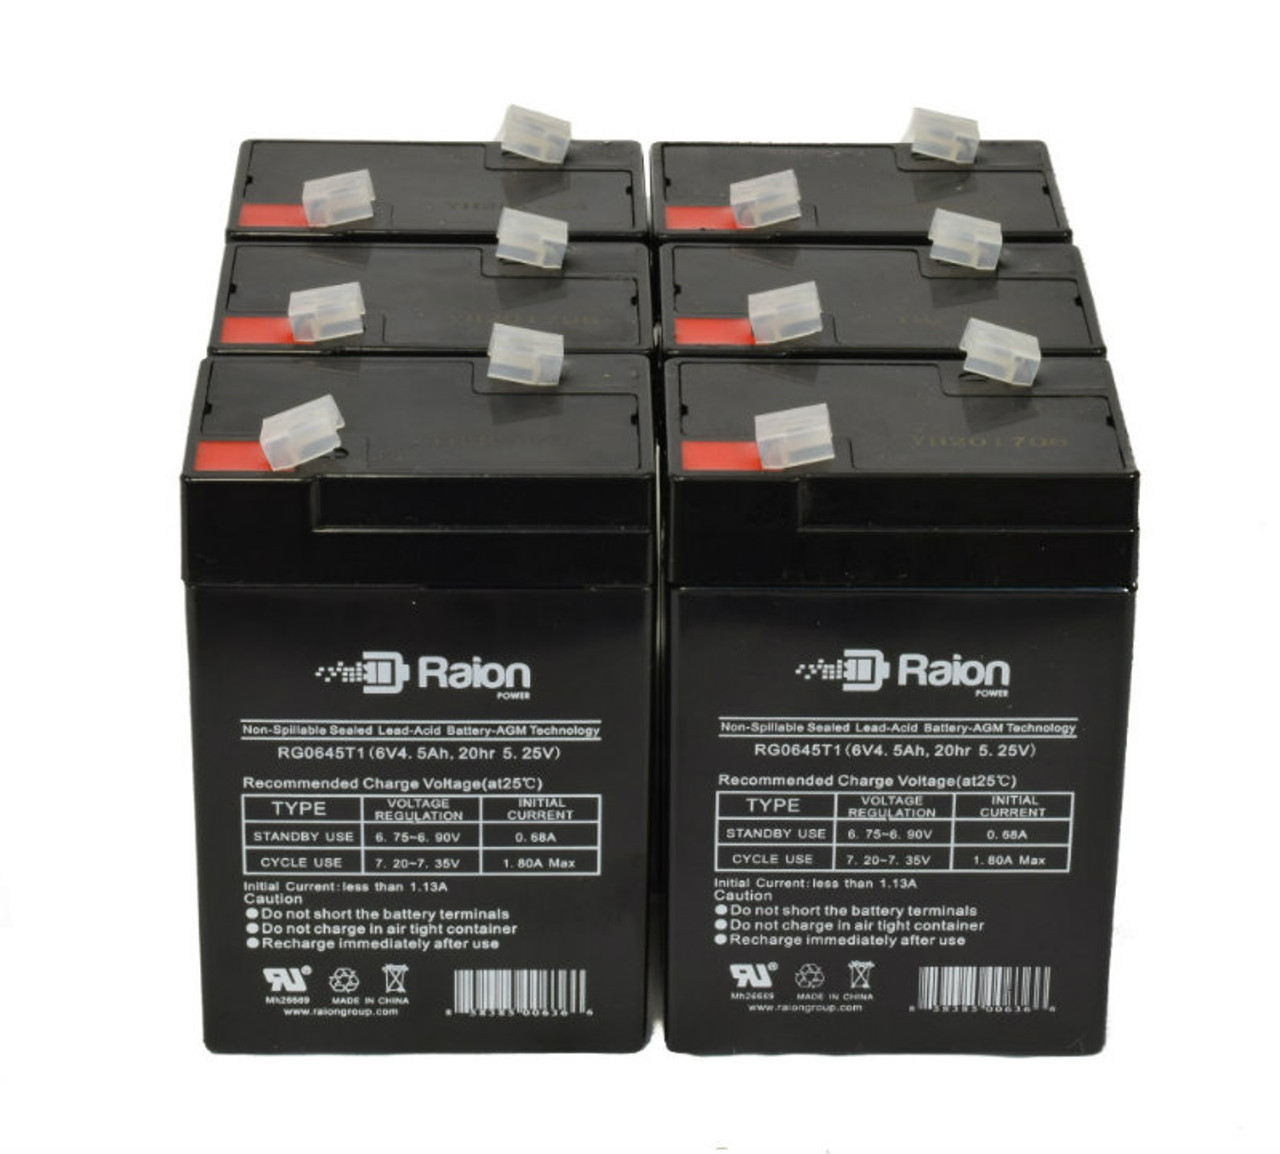 Raion Power RG0645T1 6V 4.5Ah Replacement Medical Equipment Battery for Welch Allyn CP100 ECG - 6 Pack